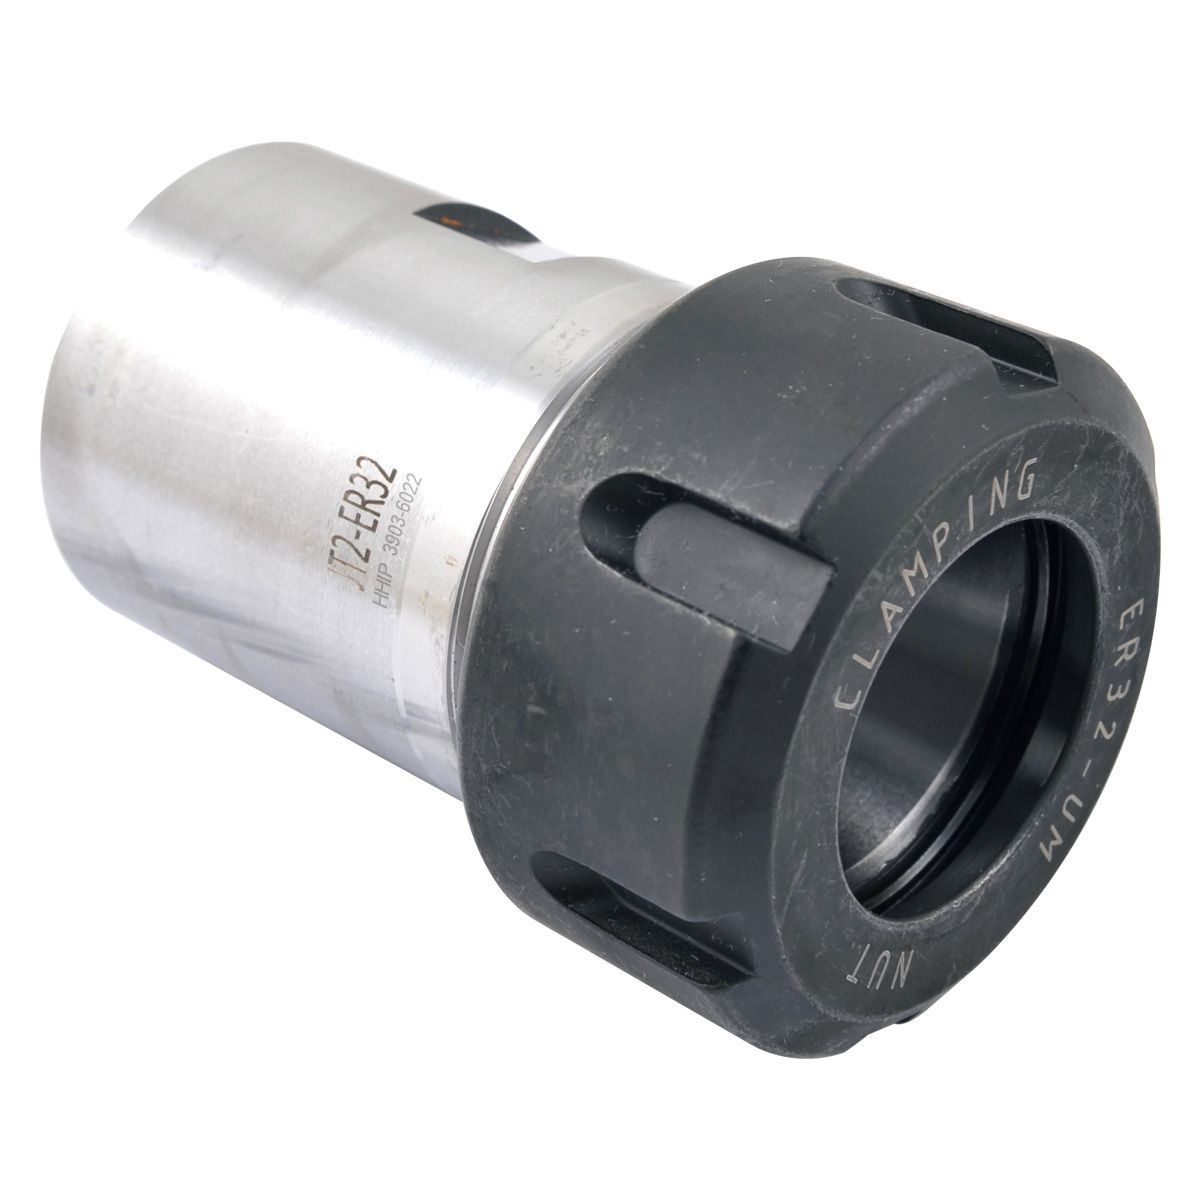 ER32 COLLET & DRILL CHUCK WITH JT2 SLEEVE (3903-6022)